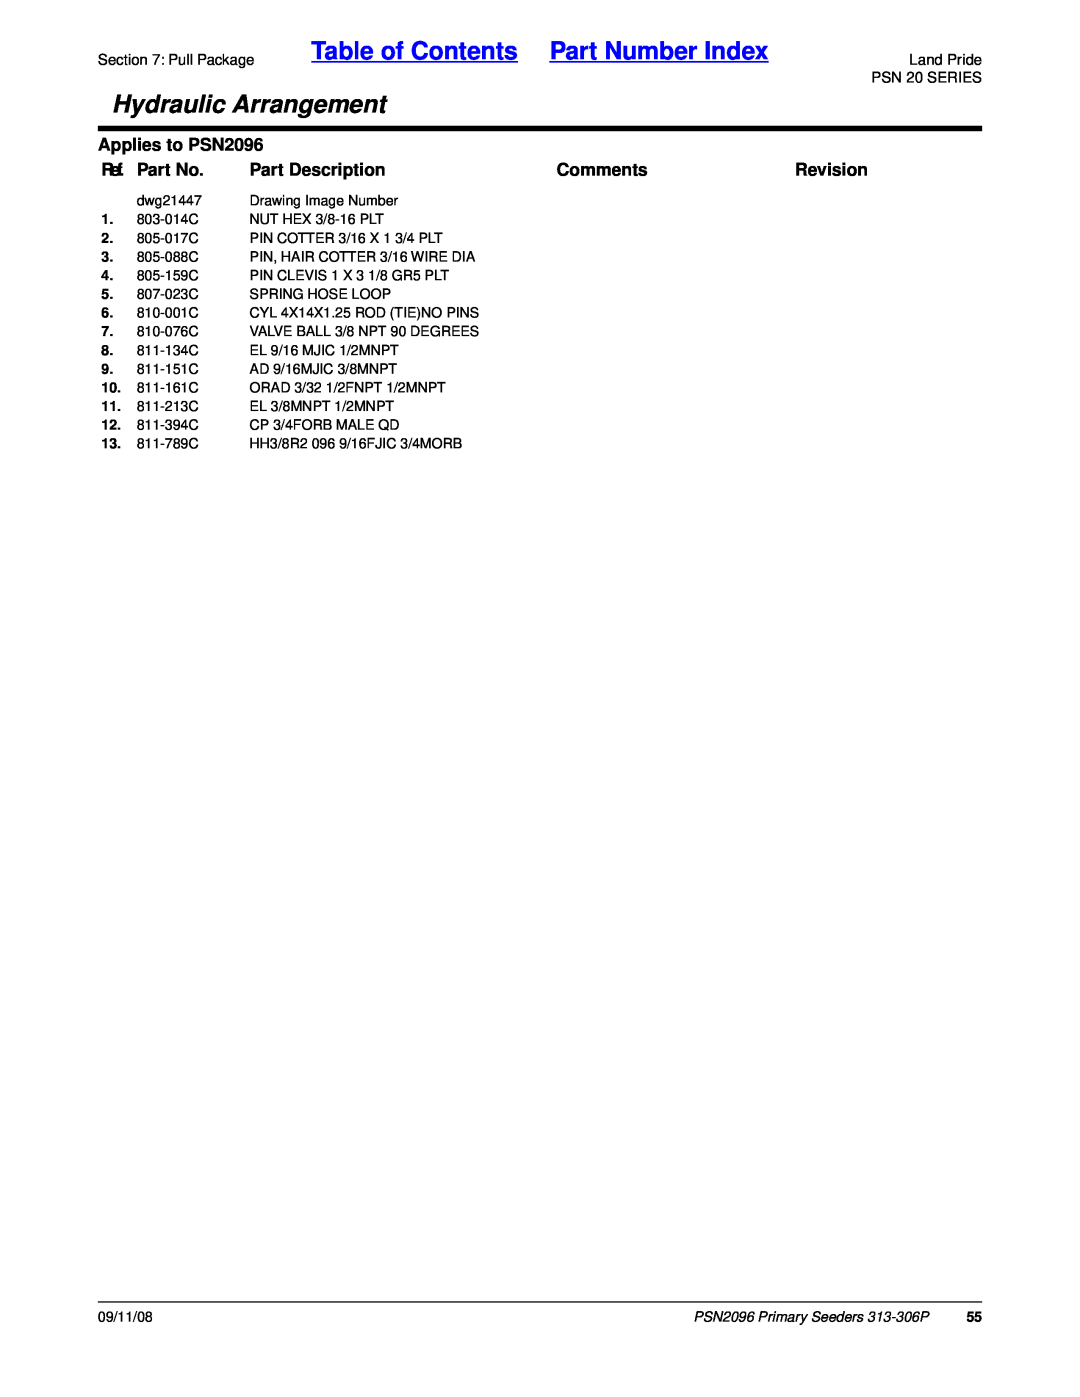 Land Pride 20583 Table of Contents Part Number Index, Hydraulic Arrangement, Applies to PSN2096, Ref. Part No, Comments 